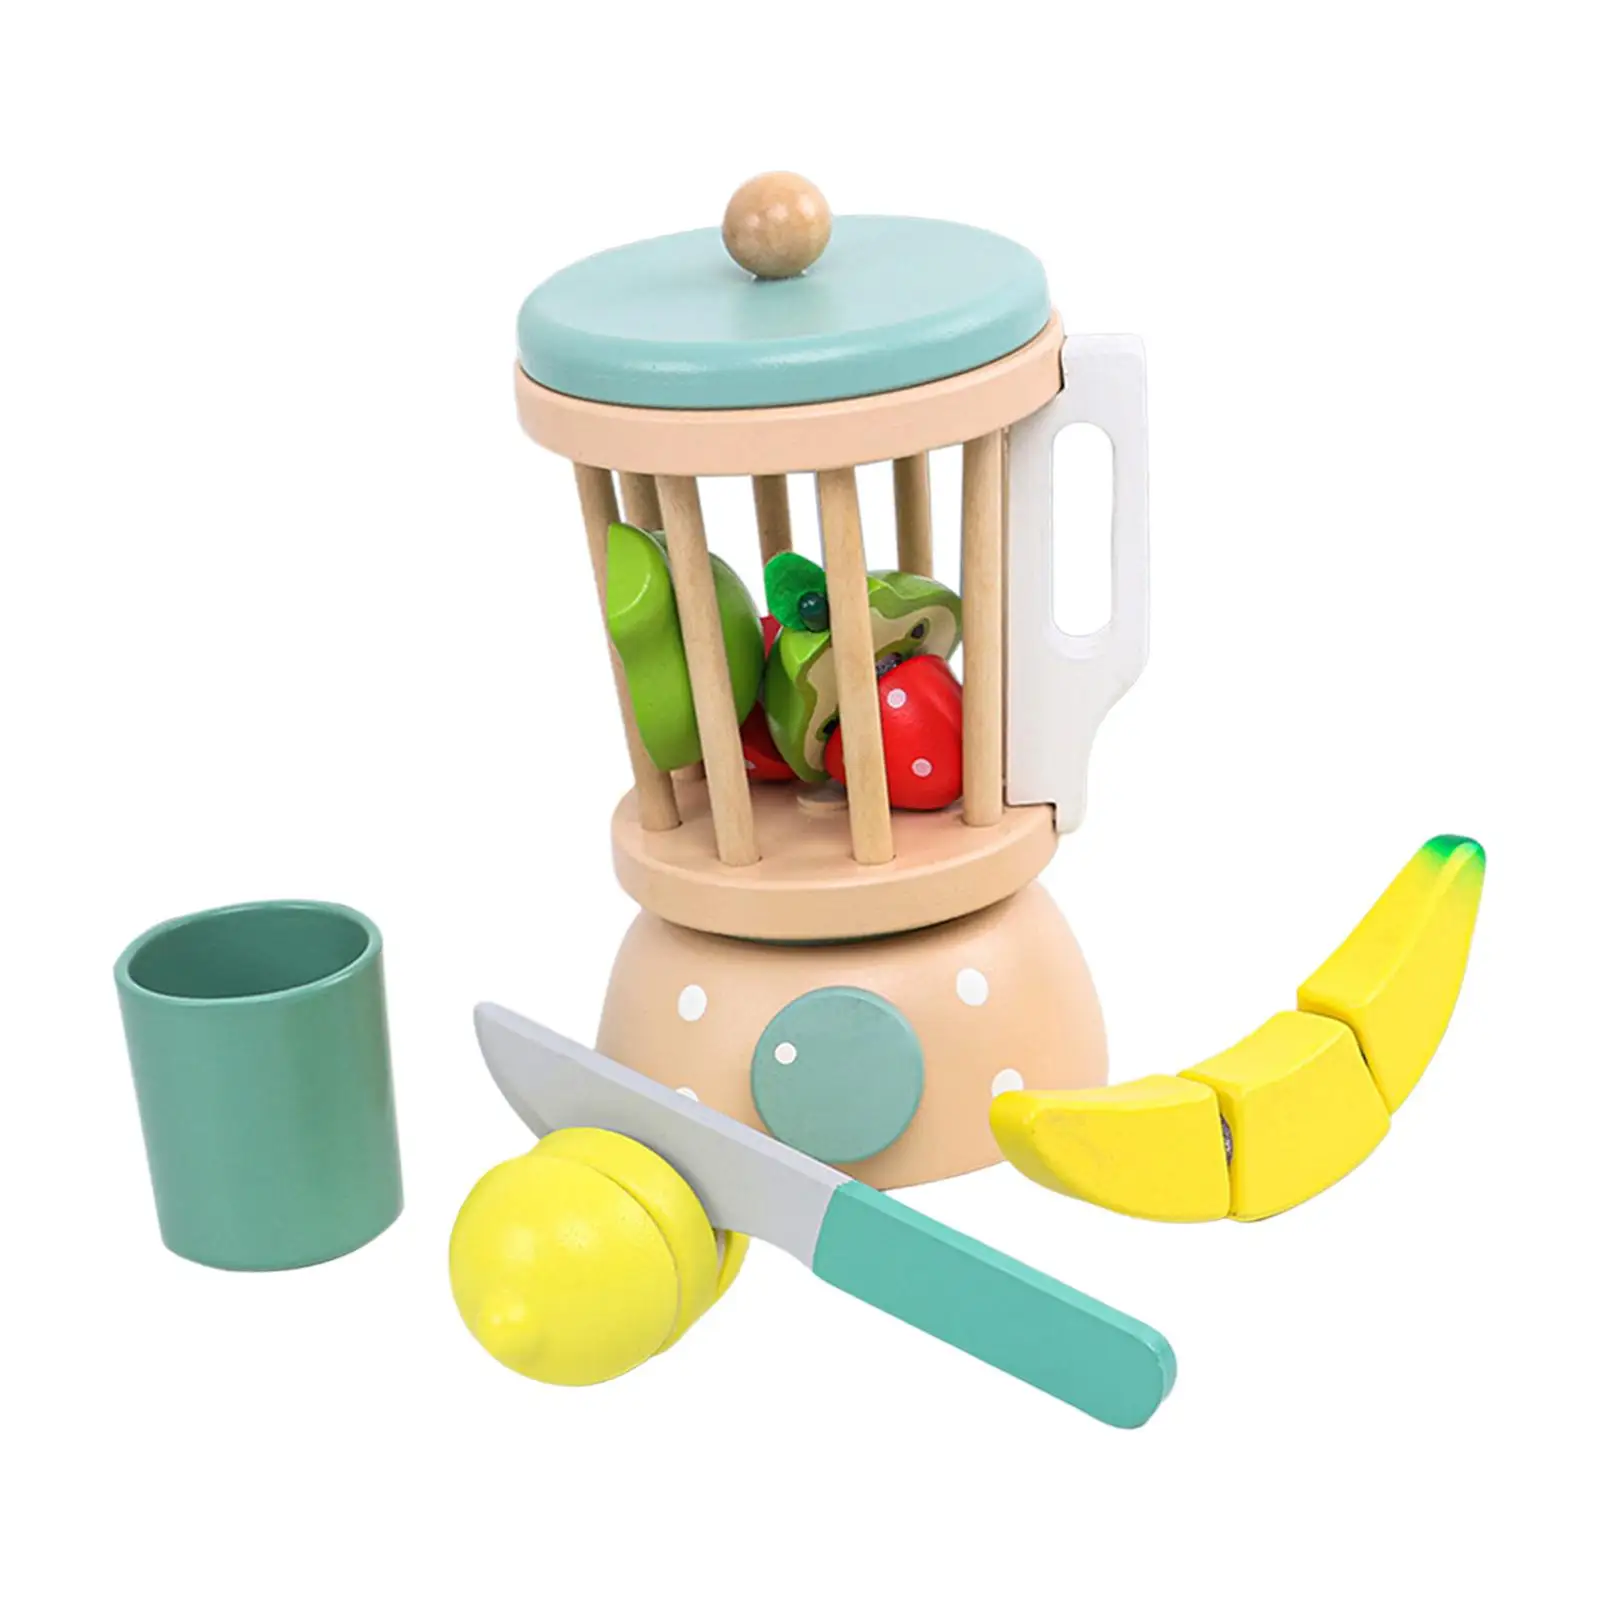 Simulated Pretend Play color Perception Interactive Wooden Smoothie Set for Preschool Age